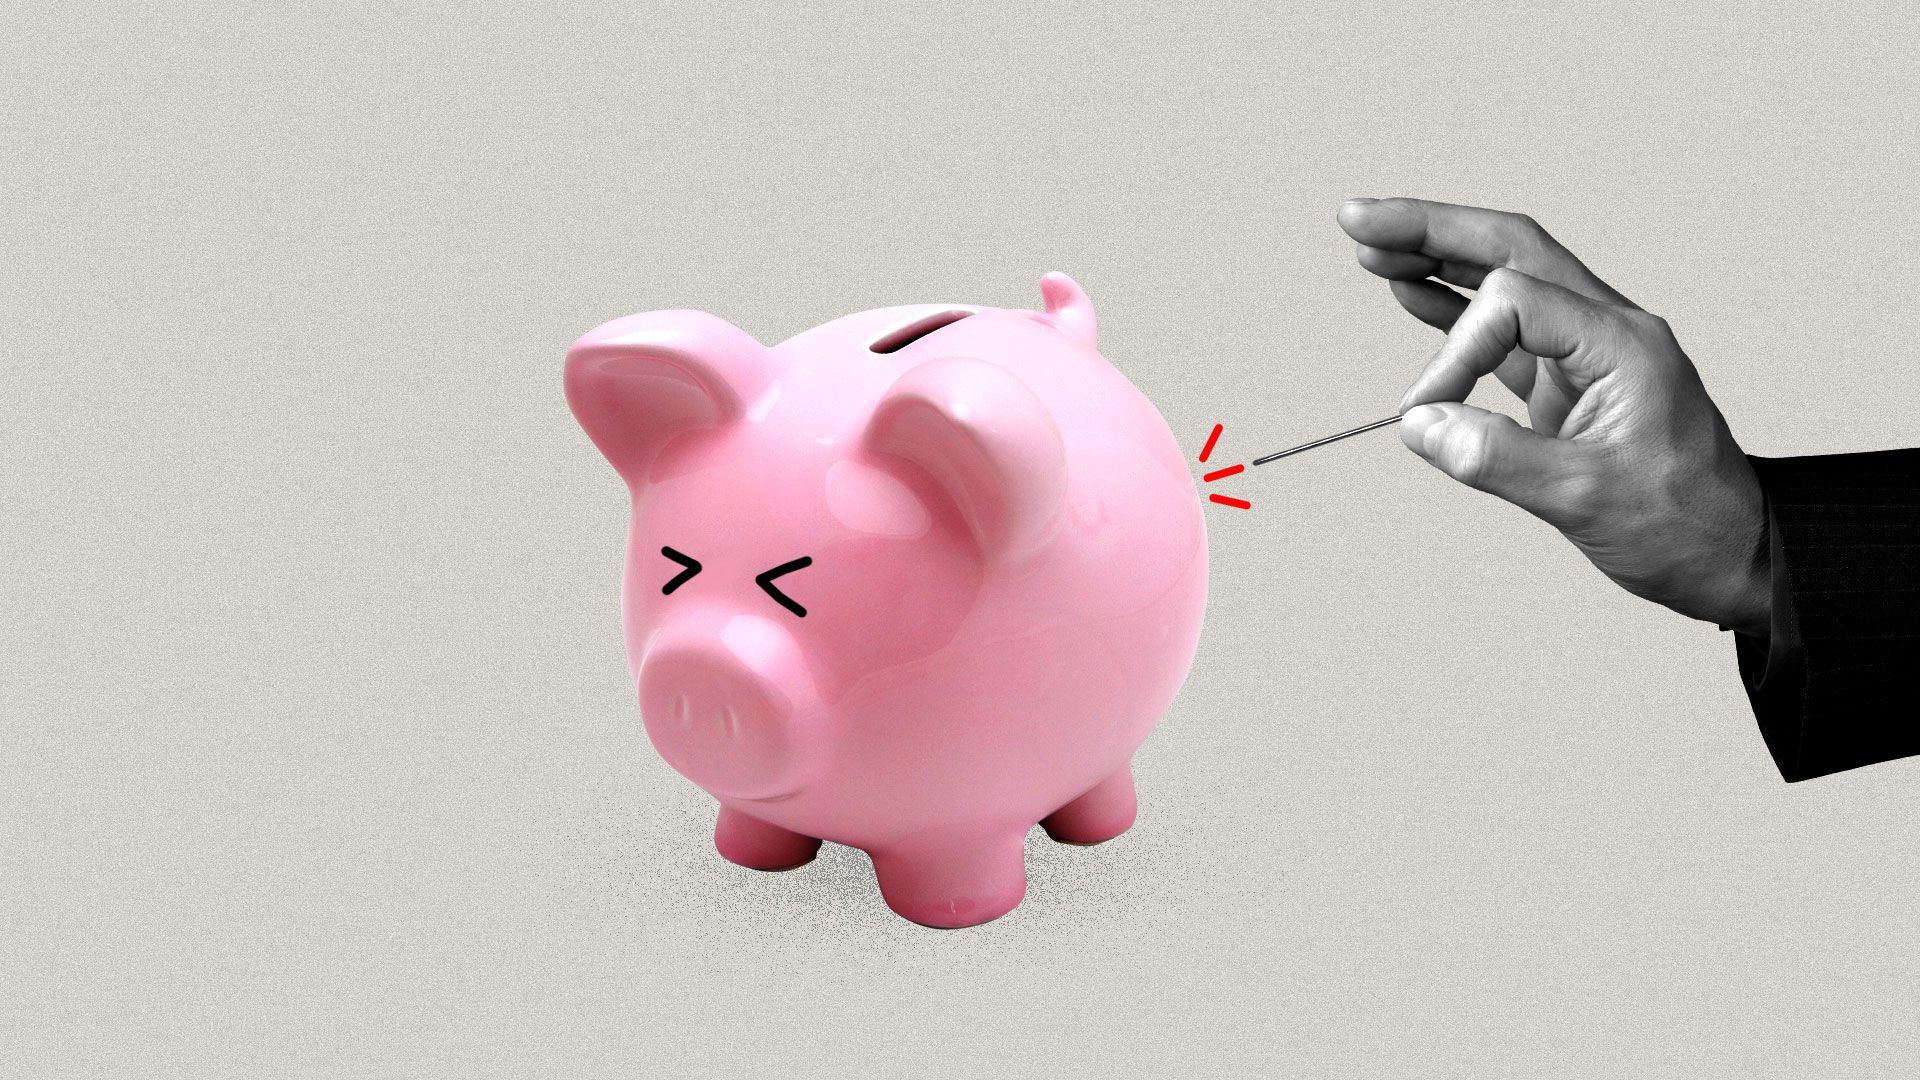 A hand with a pin poking a piggy bank